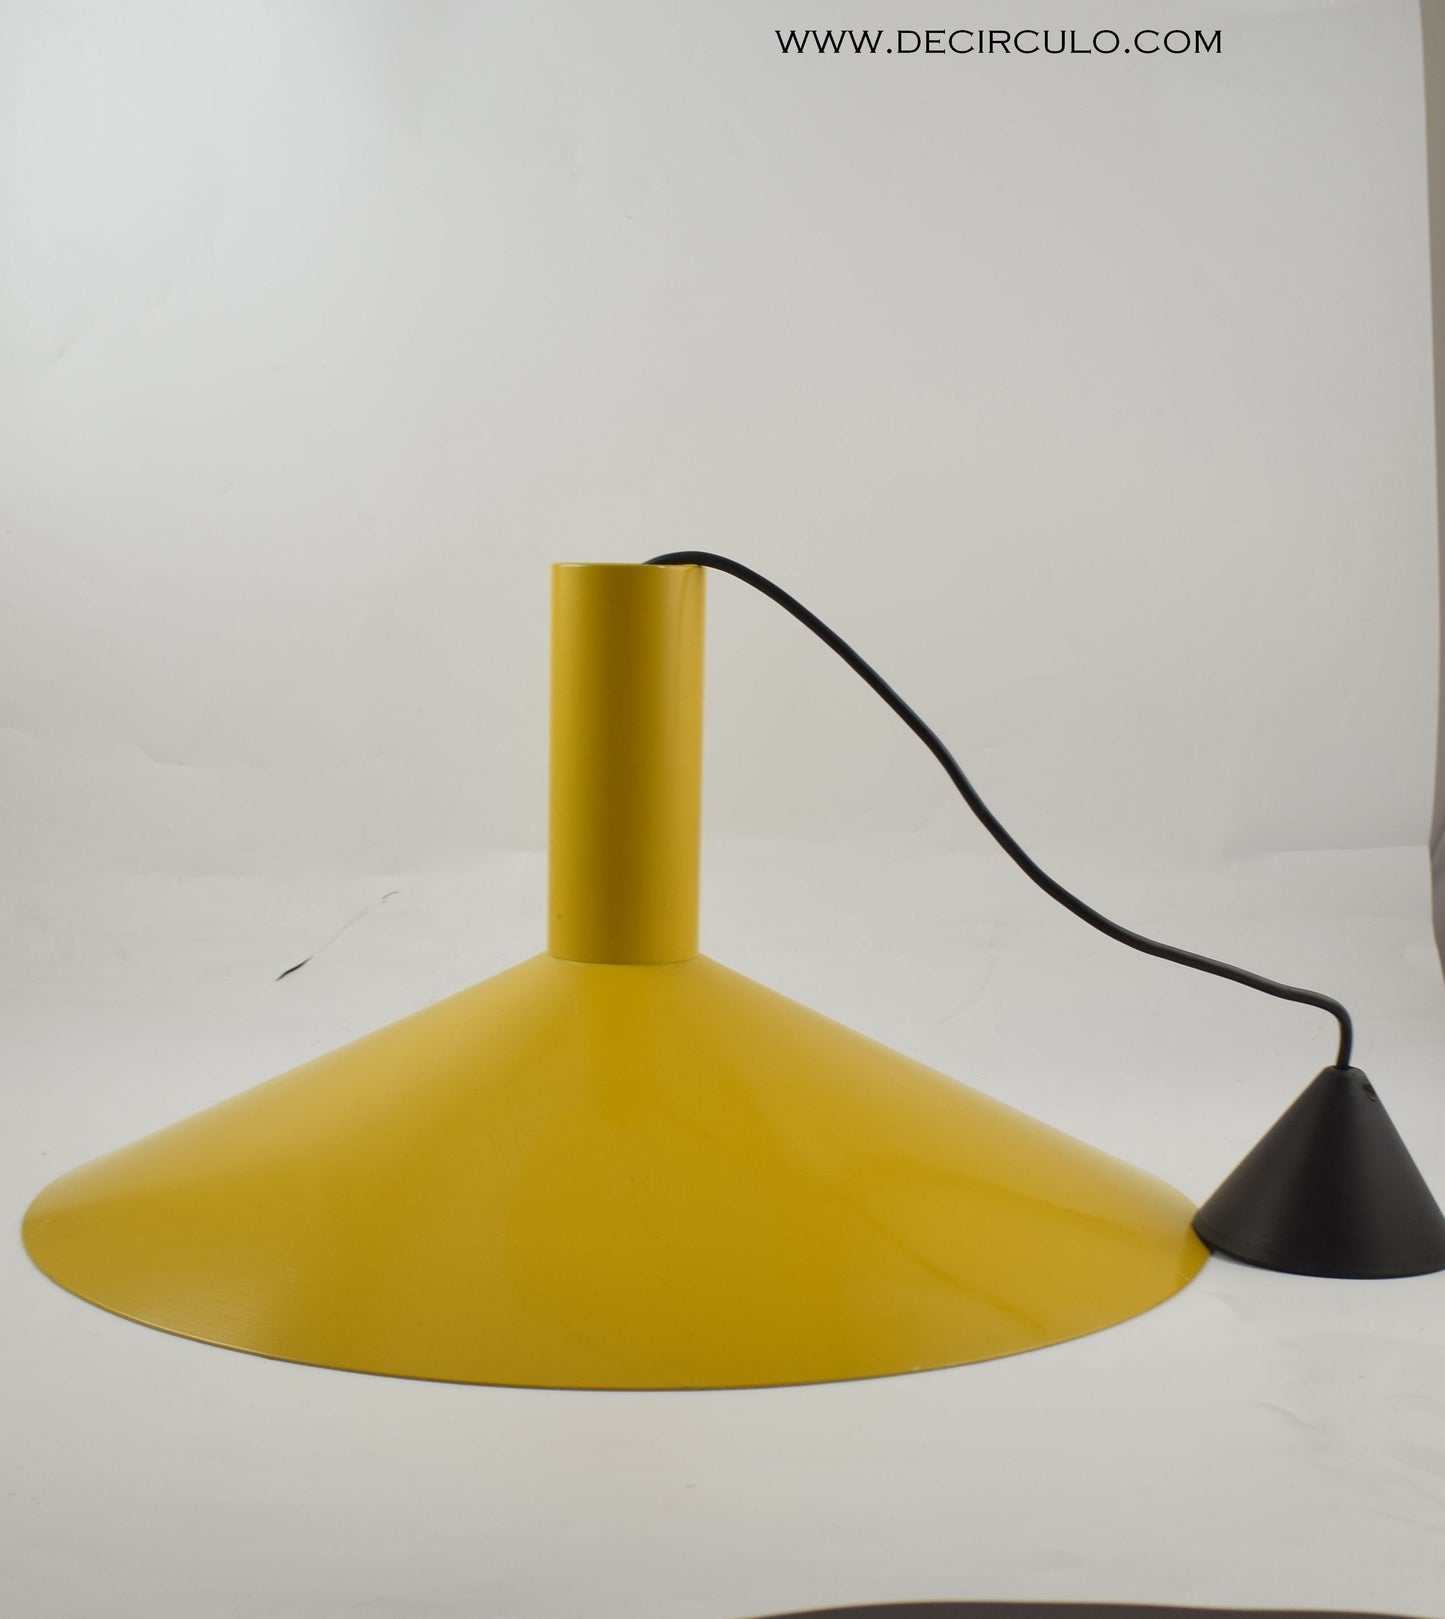 Fog and Morup Formel 3 yellow pendant lamp designed by Hans Due, Denmark 1975.